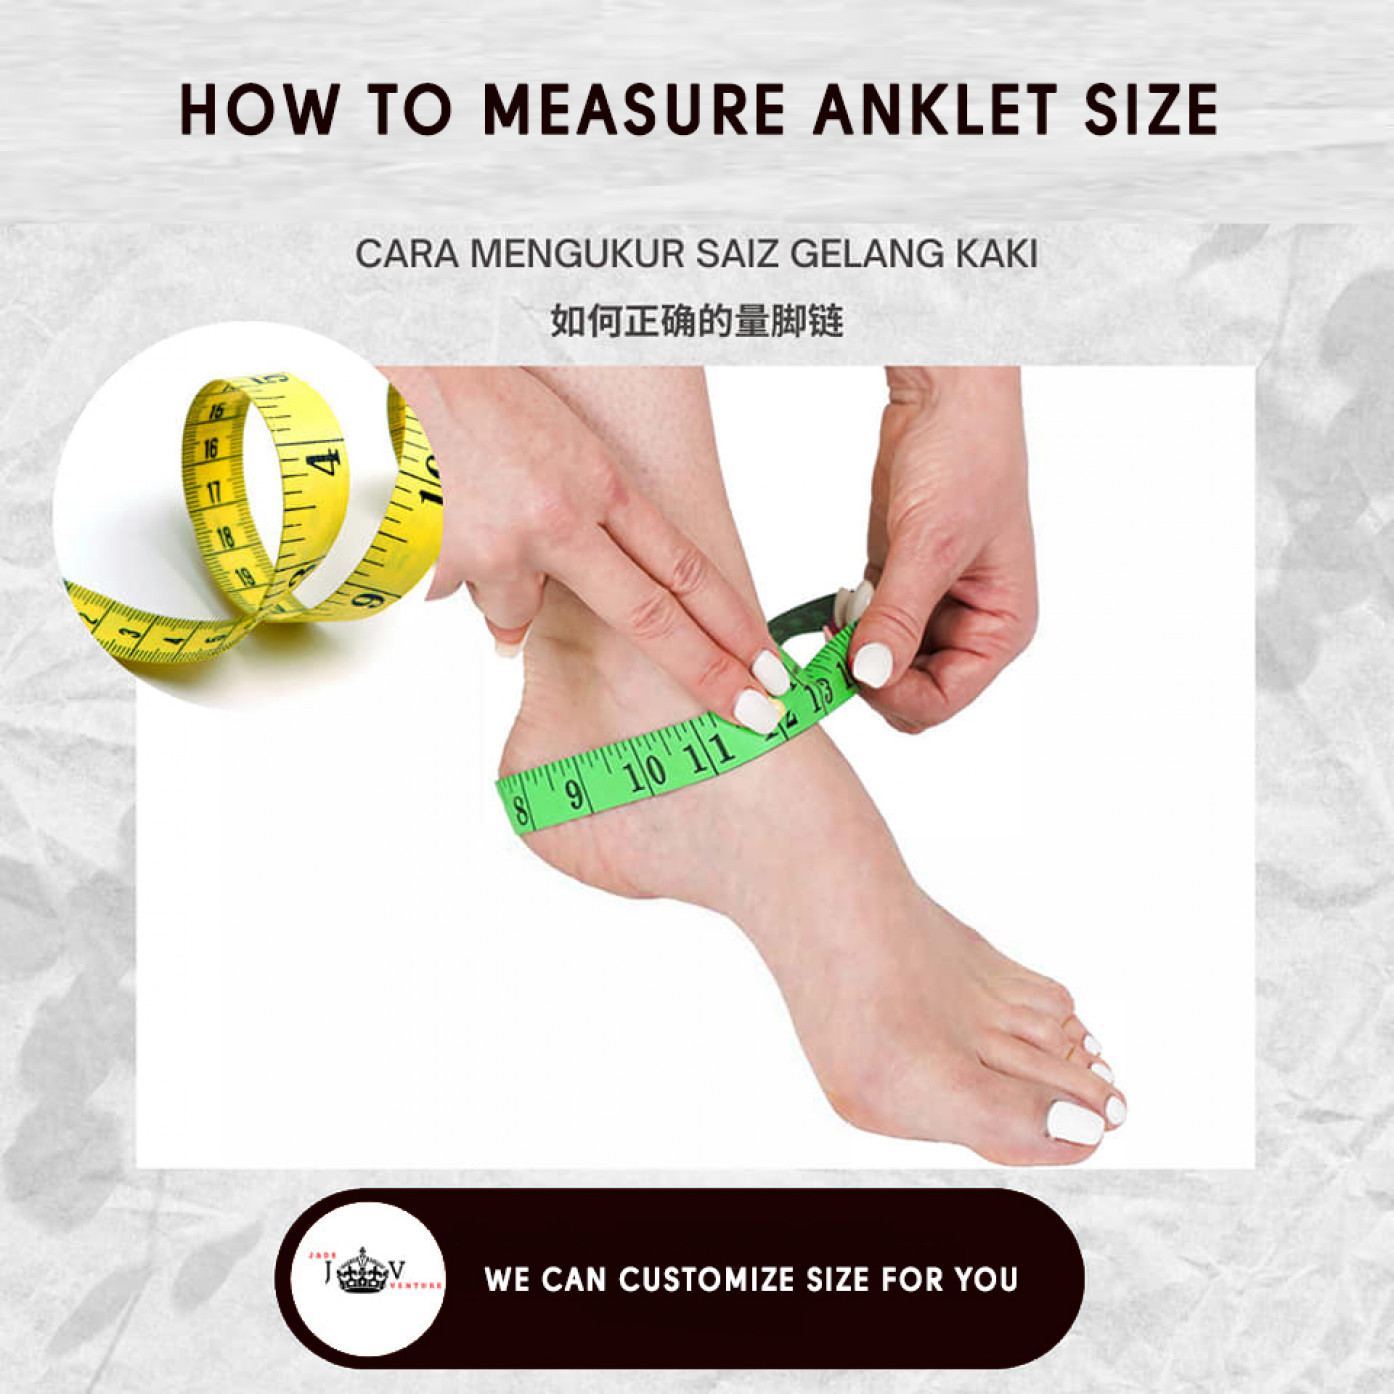 HOW TO MEASURE YOUR ANKLET SIZE